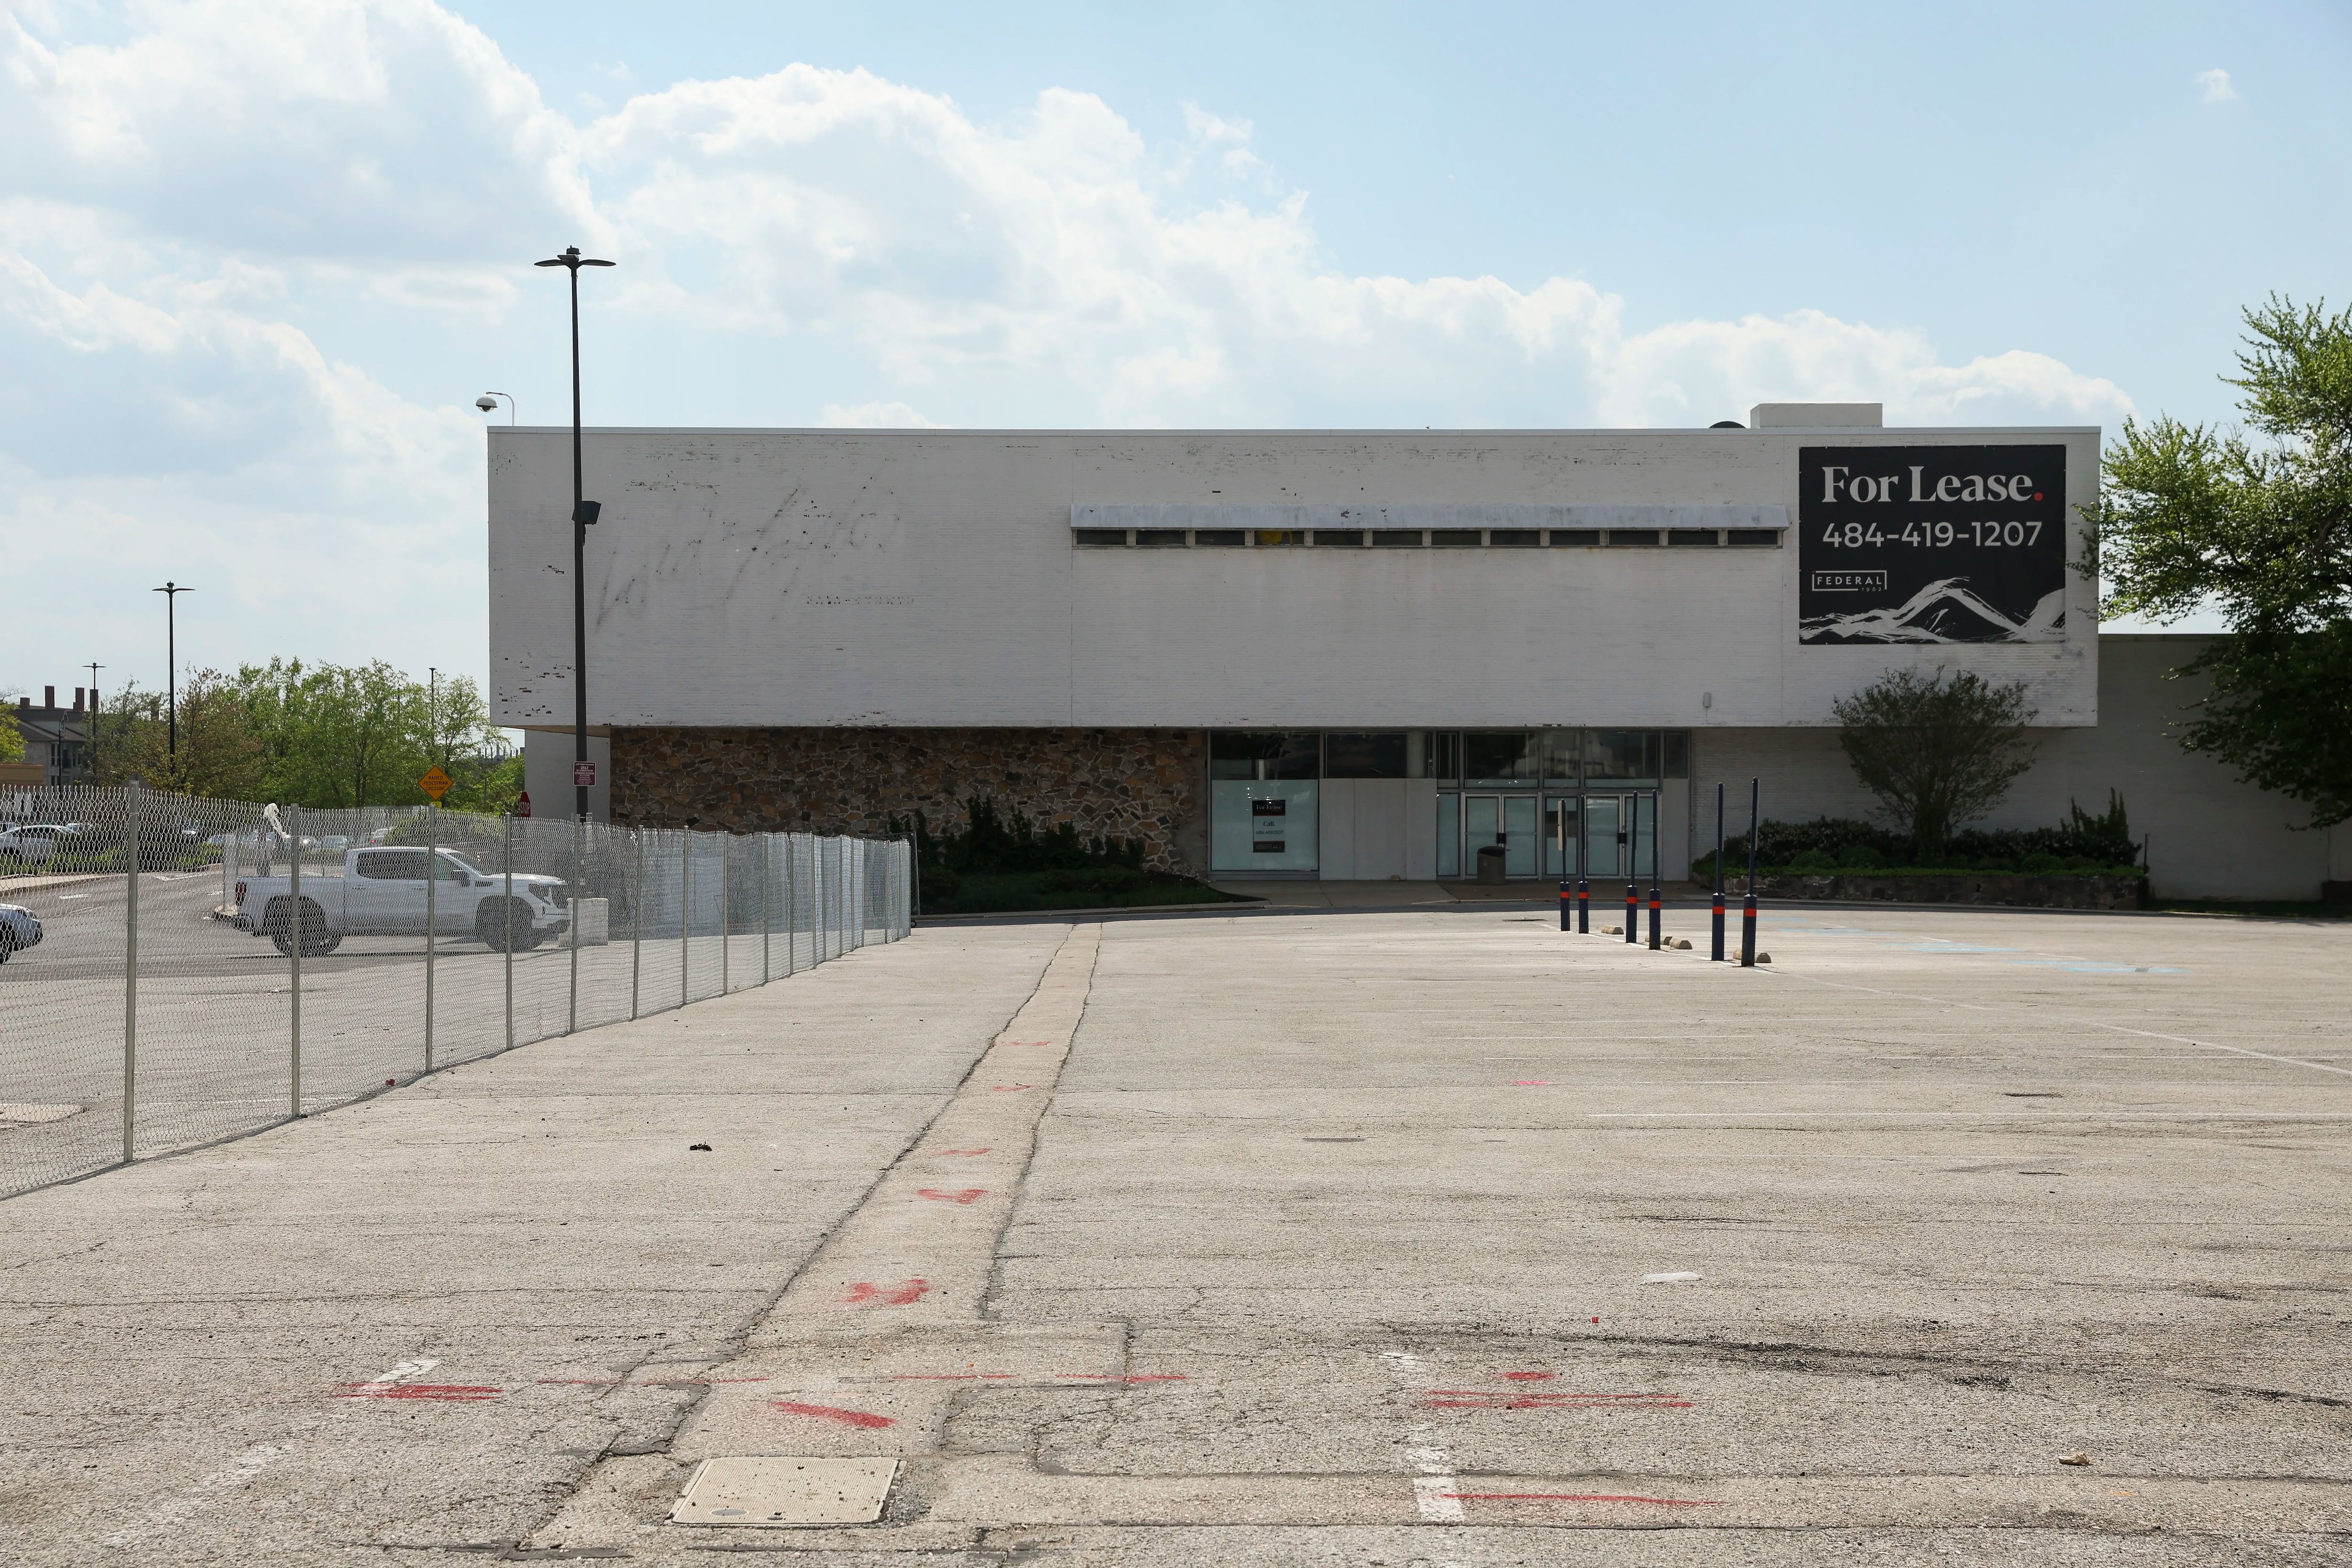 The old Lord & Taylor site on City Avenue in Bala Cynwyd. Federal Realty Investment Trust plans to build 217 residential units at the site.